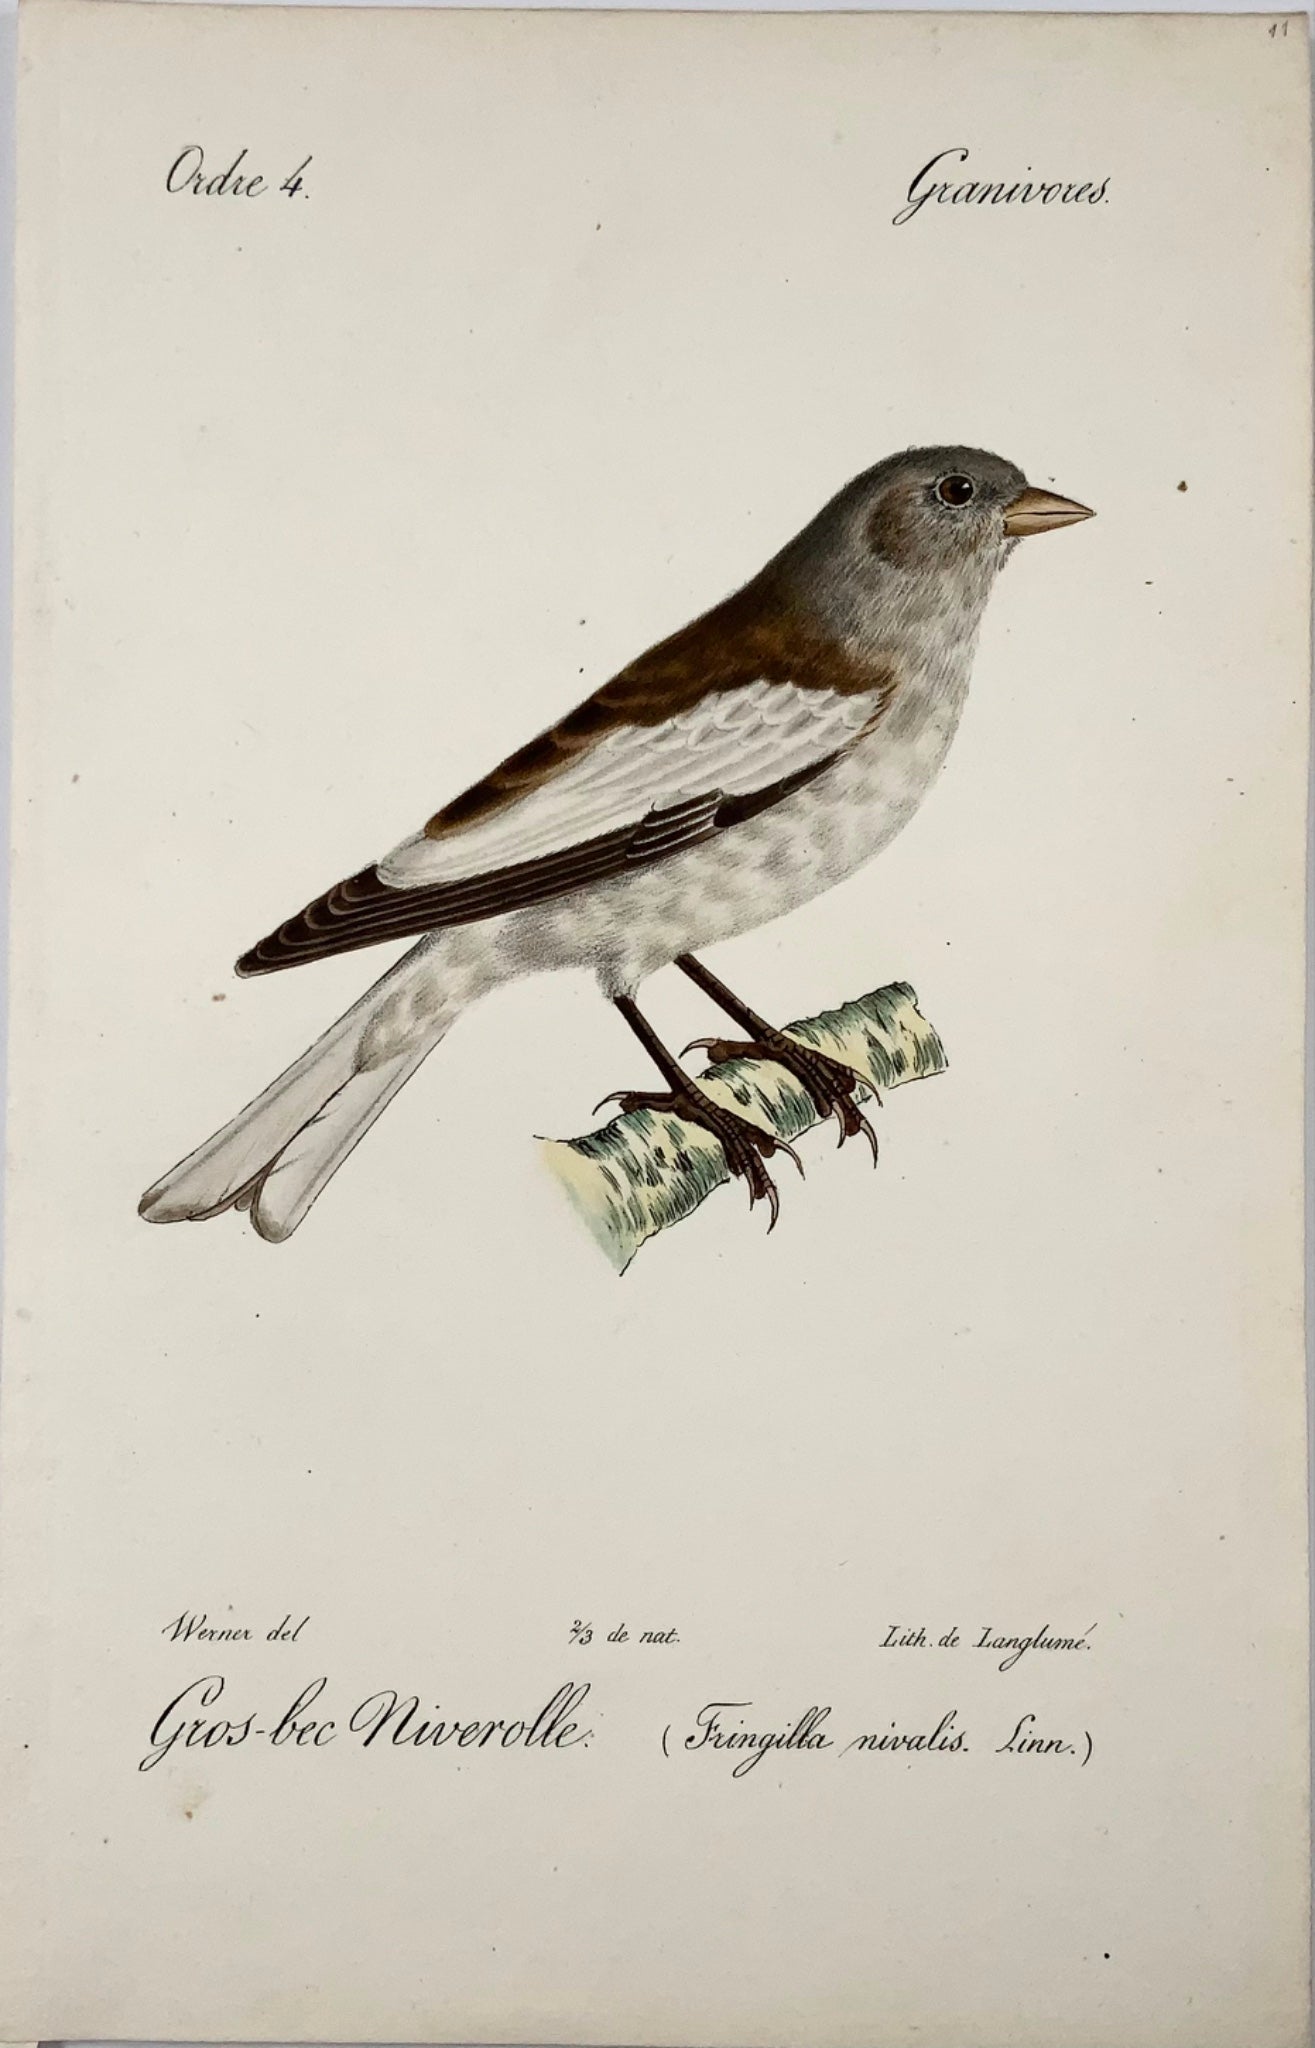 1820 Snow Finch, after Werner by Langume, stone lithograph, birds. hand colour